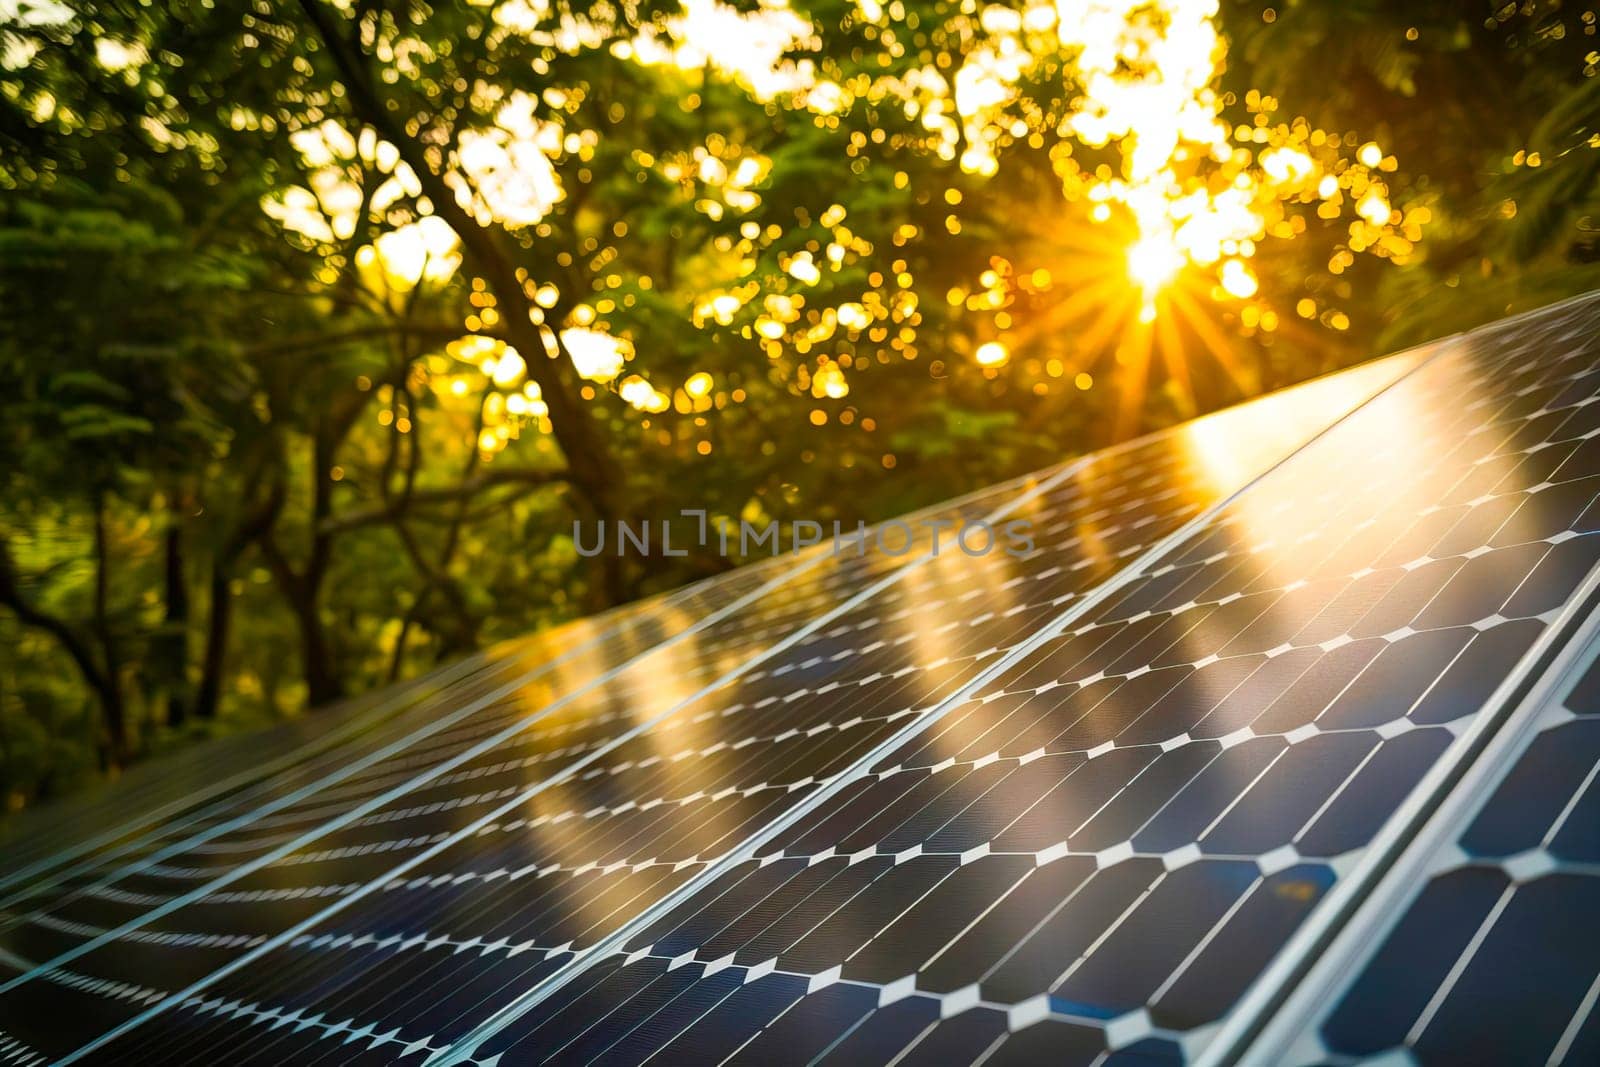 Suns rays filtering through dense forest to illuminate solar panel in close-up shot. by vladimka